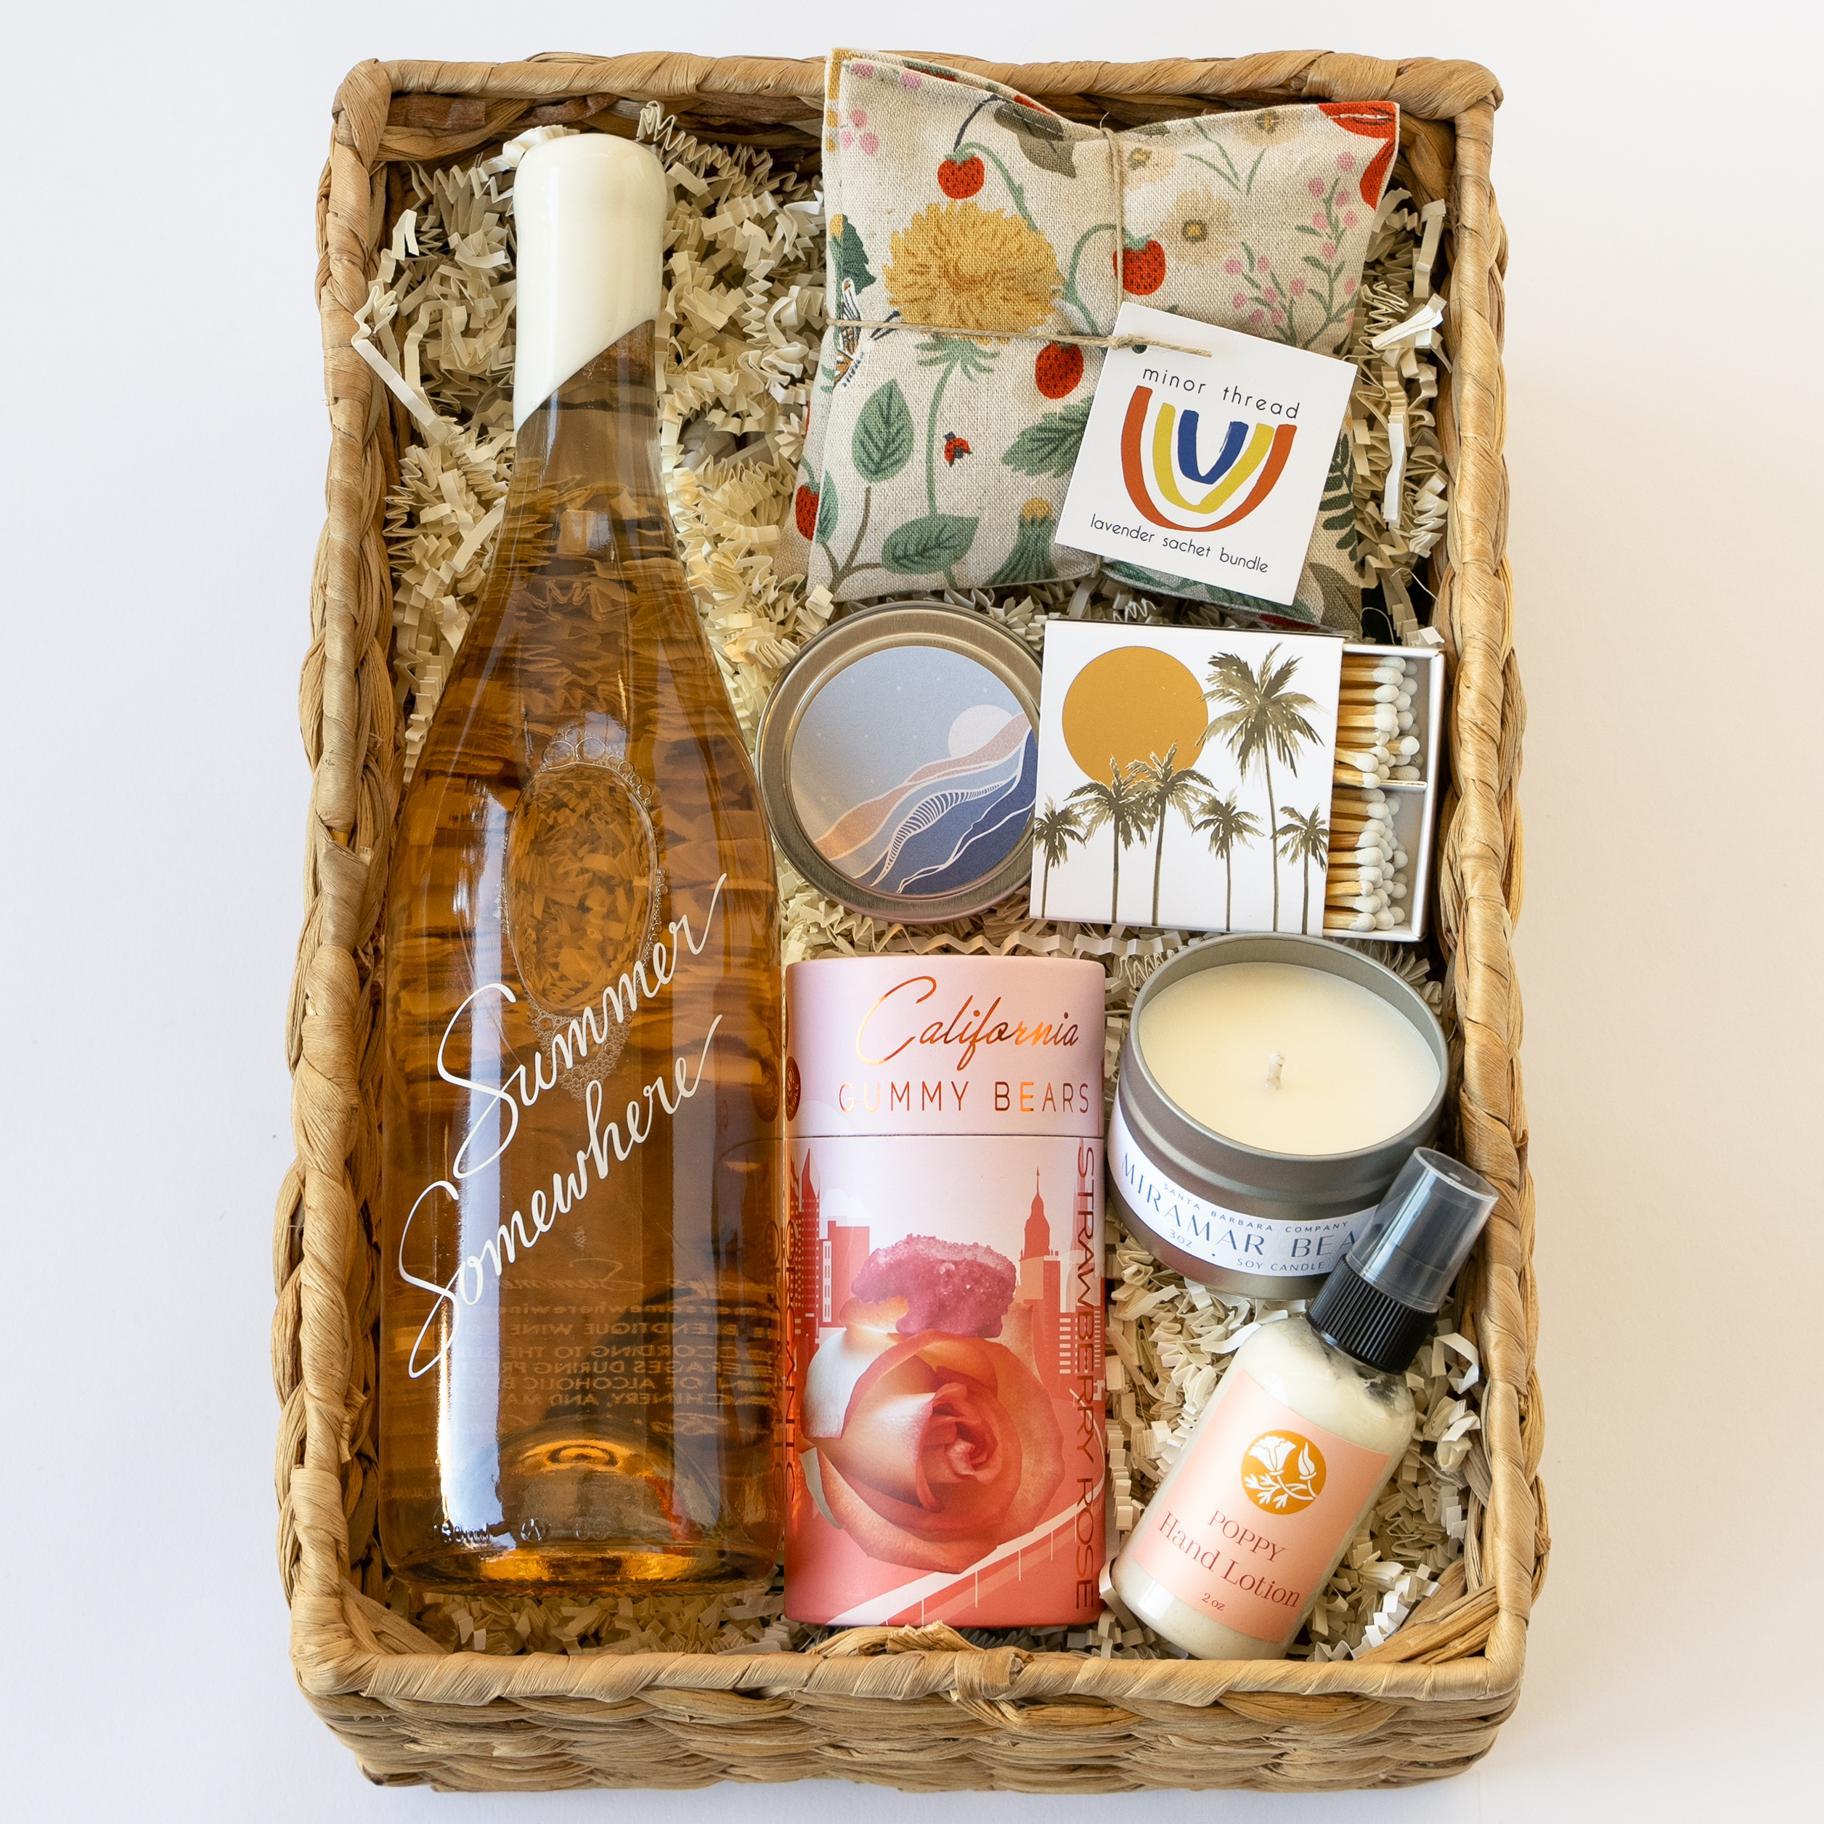 Basket filled with wine, sachets, a candle, matches, gummy bears and lotion